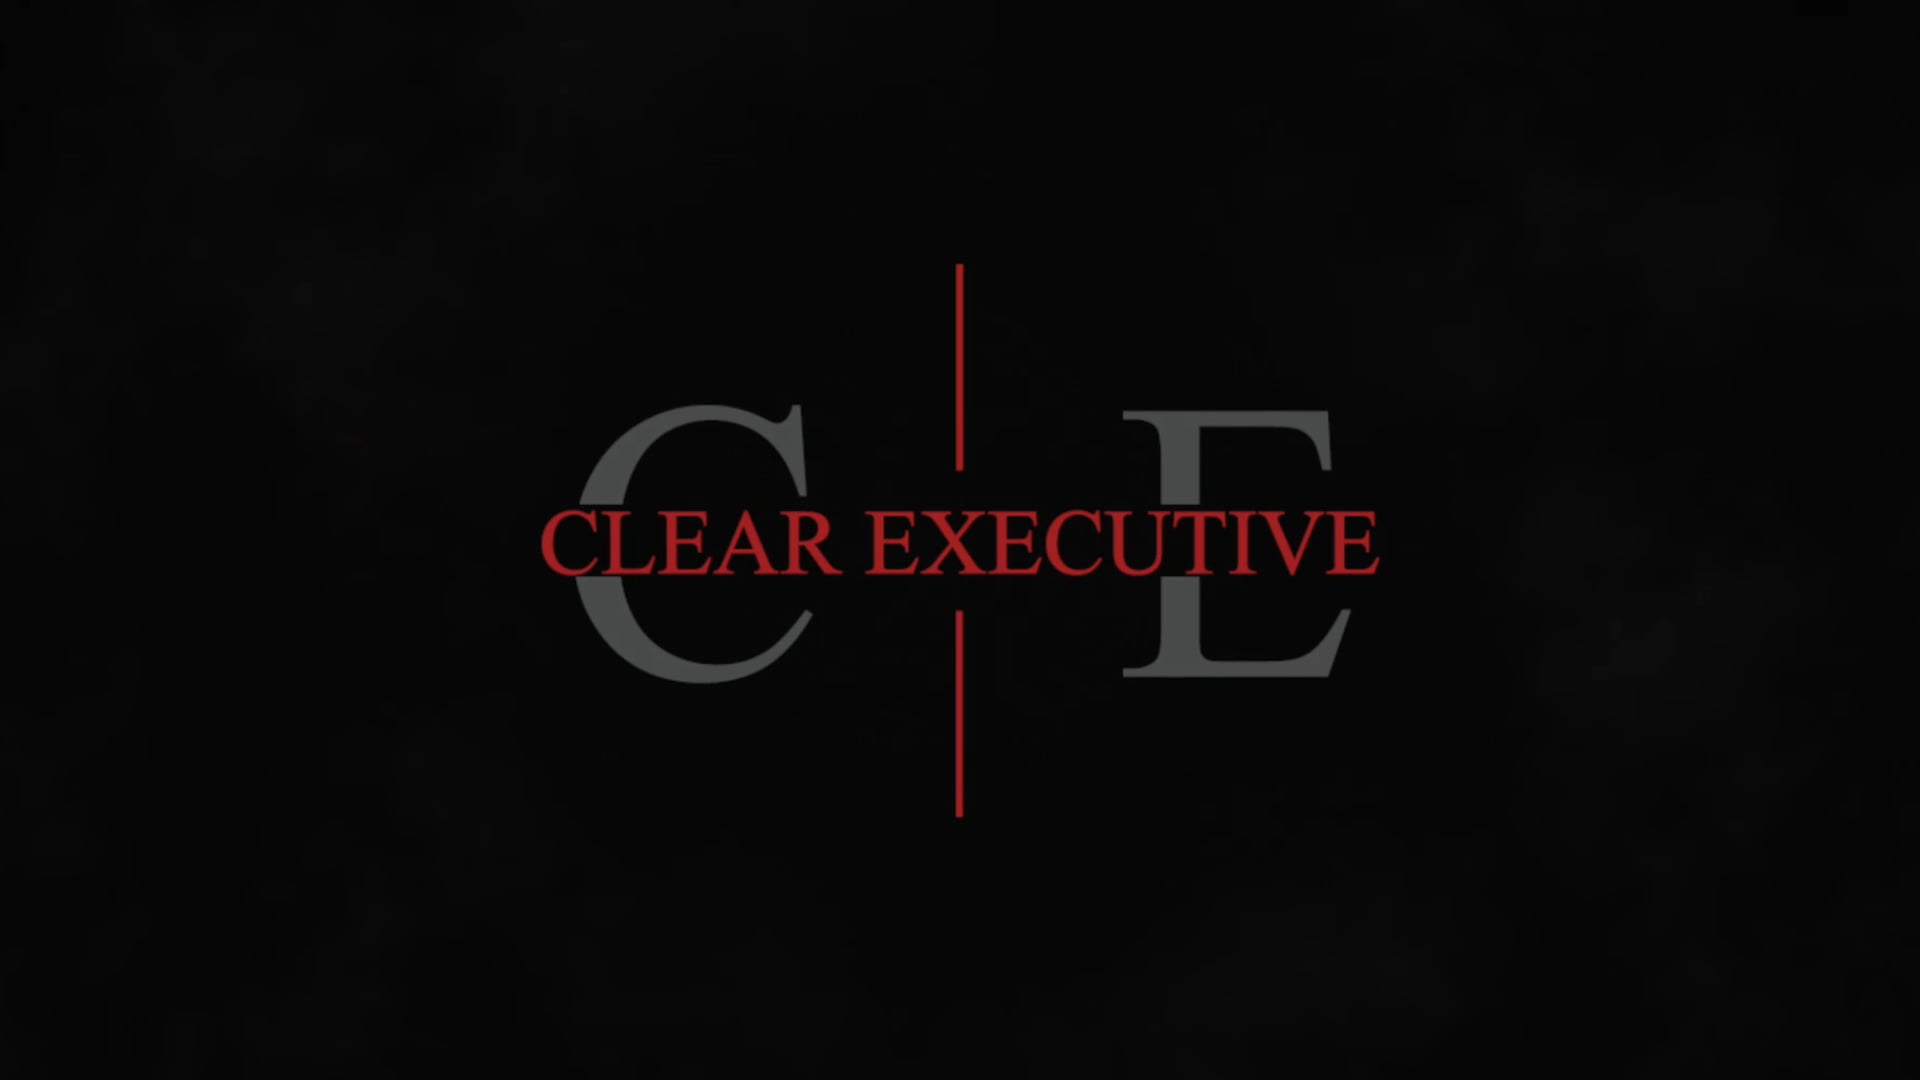 Clear Executive, a Division of Employee Solutions